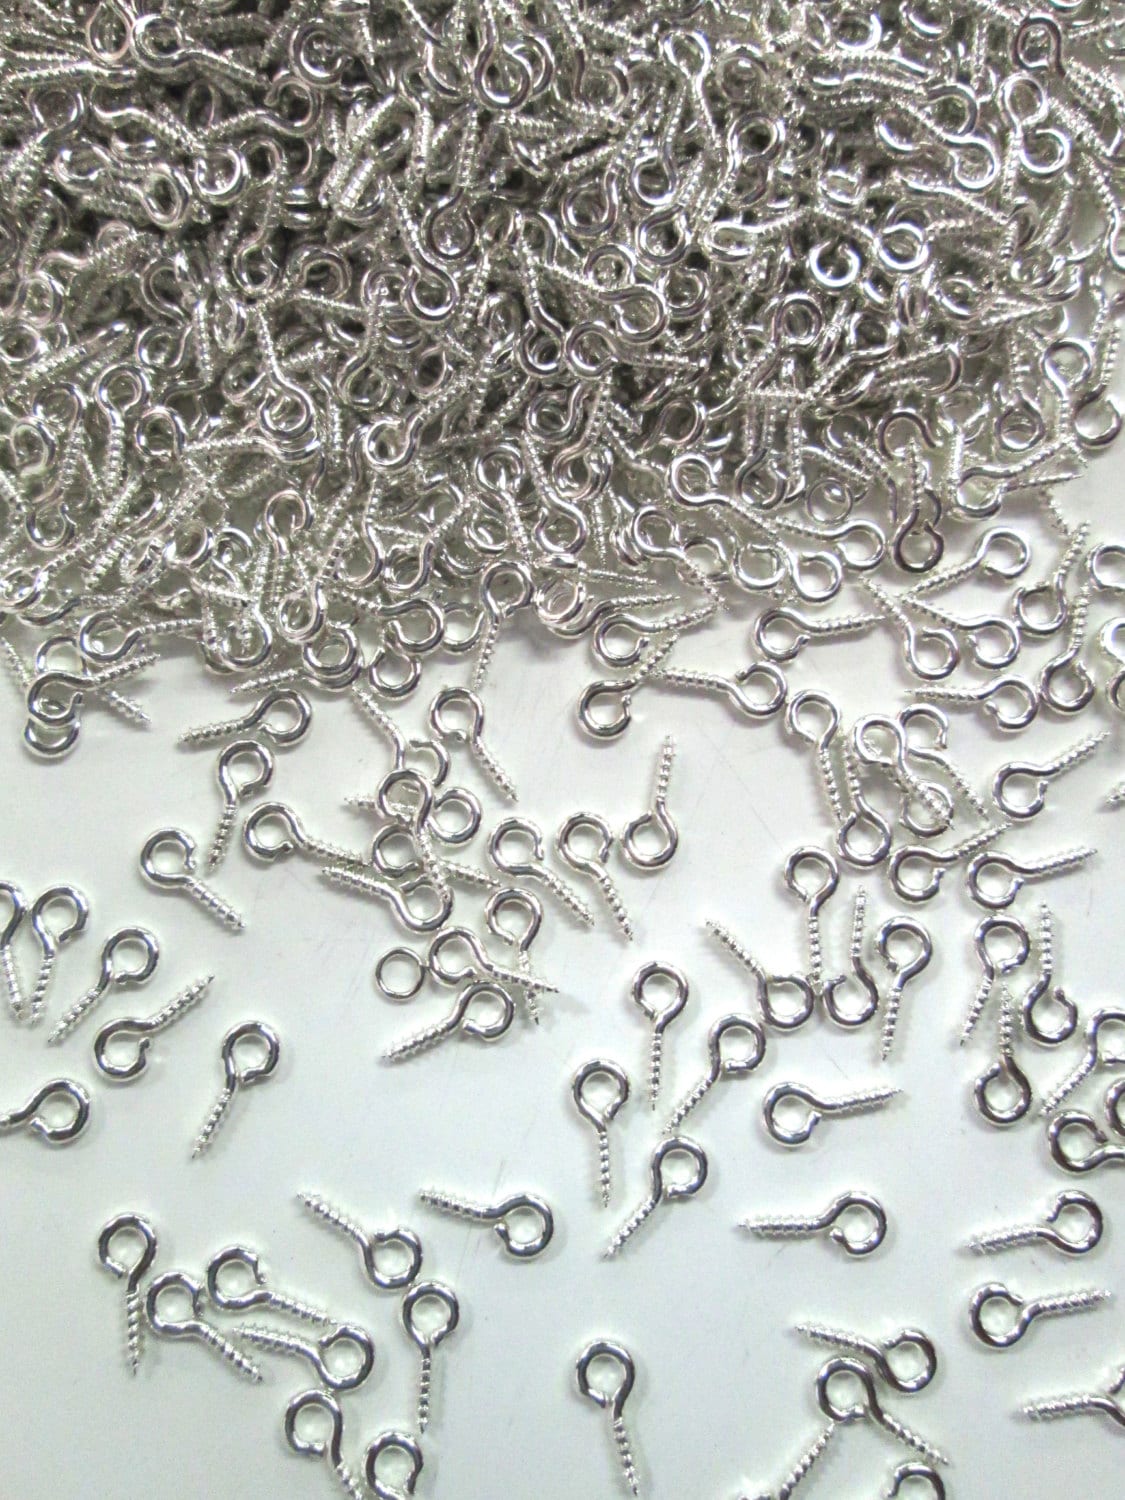 LLMSIX 300 Pieces Eye Hooks Screw Mini Metal Eye Pins for Jewelry Making  Small Eye Screws Silver Screw Eyes for DIY Art Crafts Jewelry Making  Findings Charm Bead Supplies (3 Different Sizes)